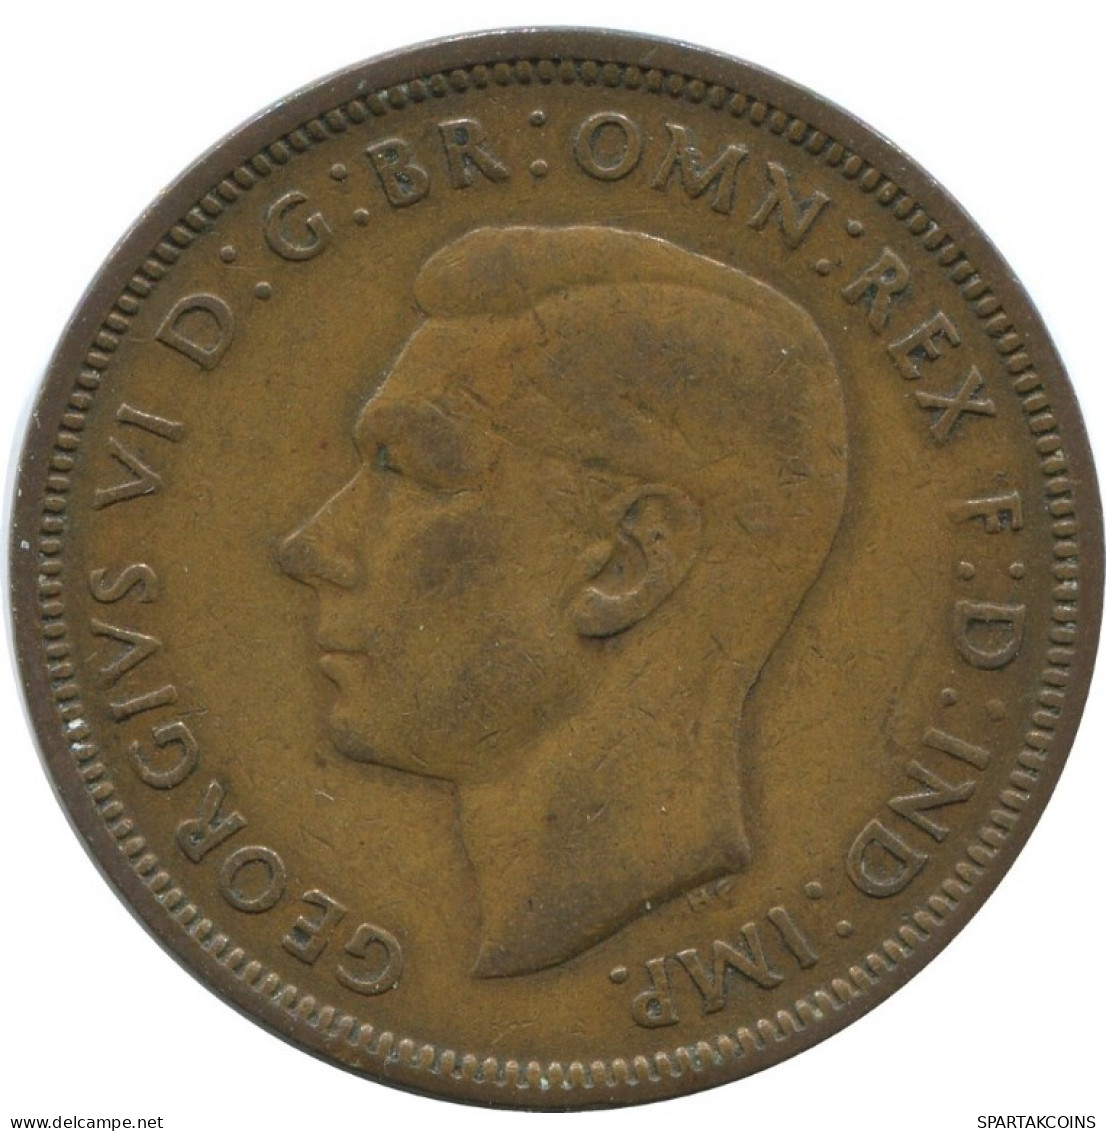 HALF PENNY 1944 UK GREAT BRITAIN Coin #AG819.1.U.A - C. 1/2 Penny